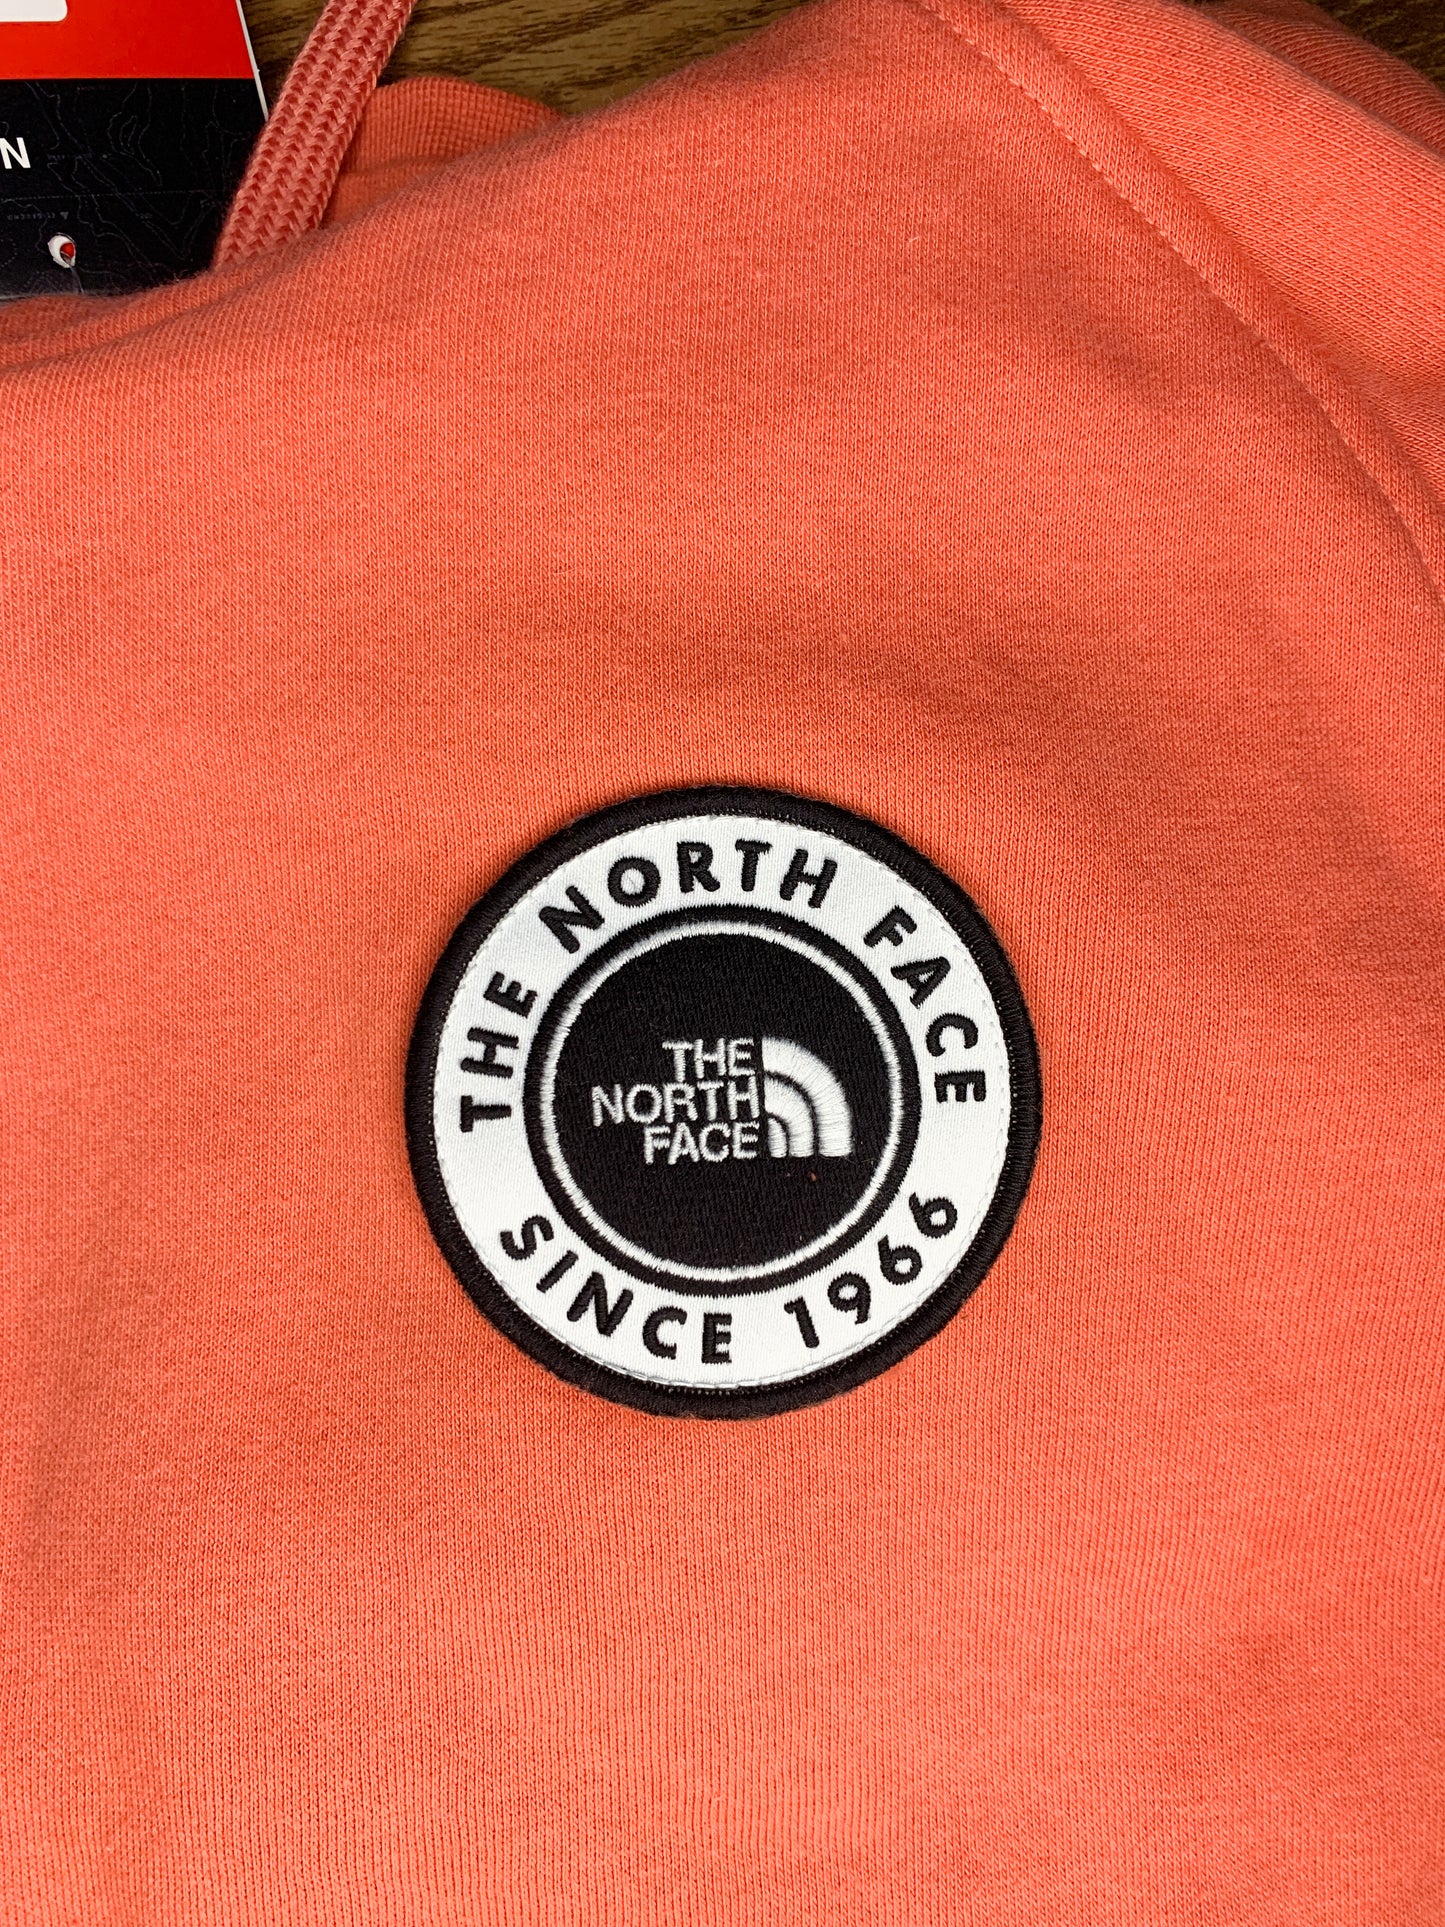 The North Face Women's Bottle Source Hoodie